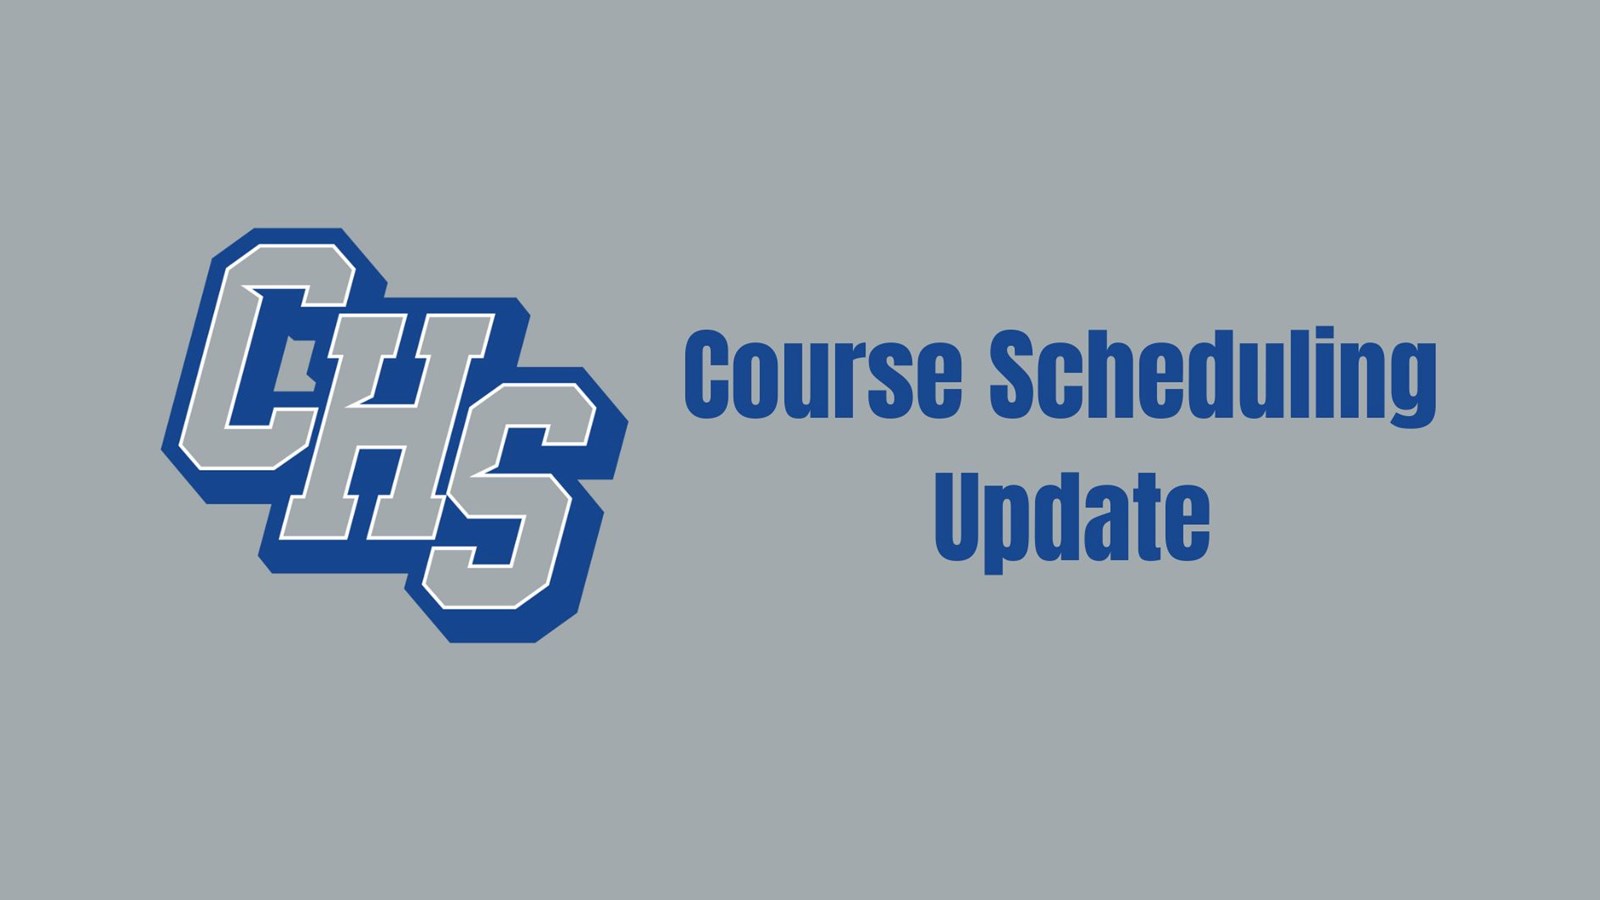 Course Scheduling information